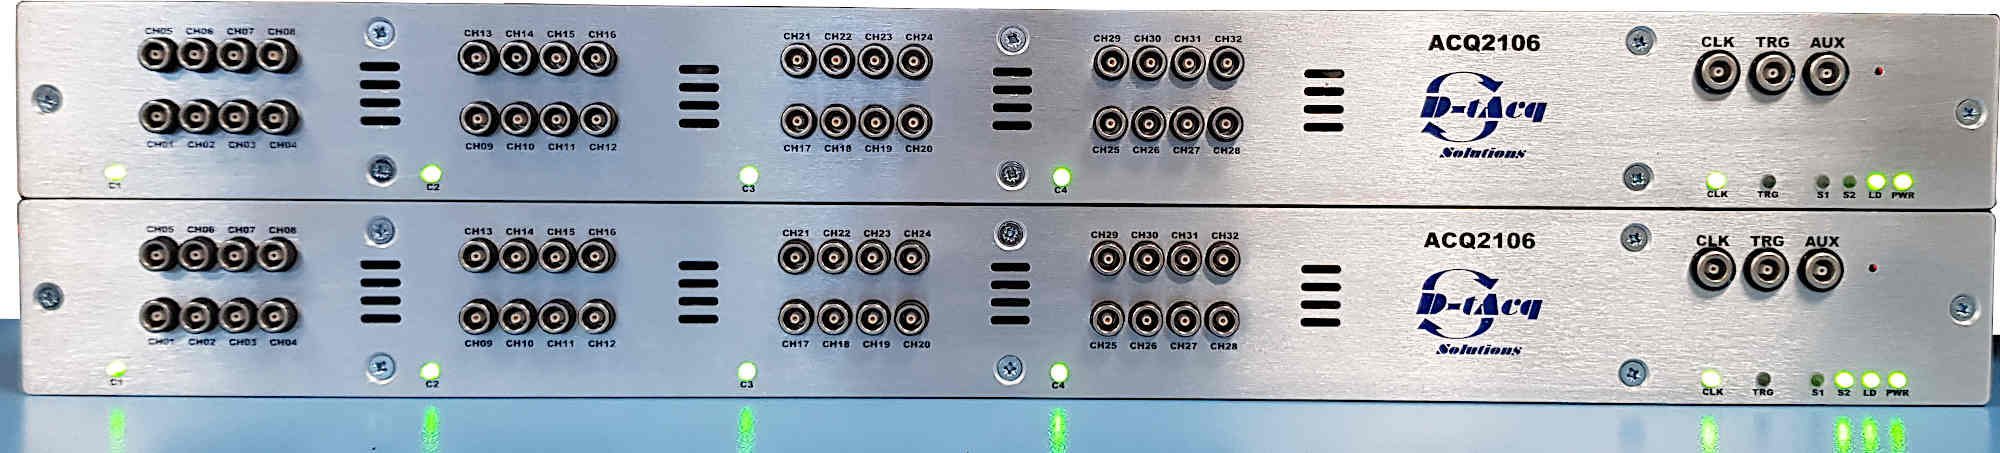 Single appliance with 32 analog inputs